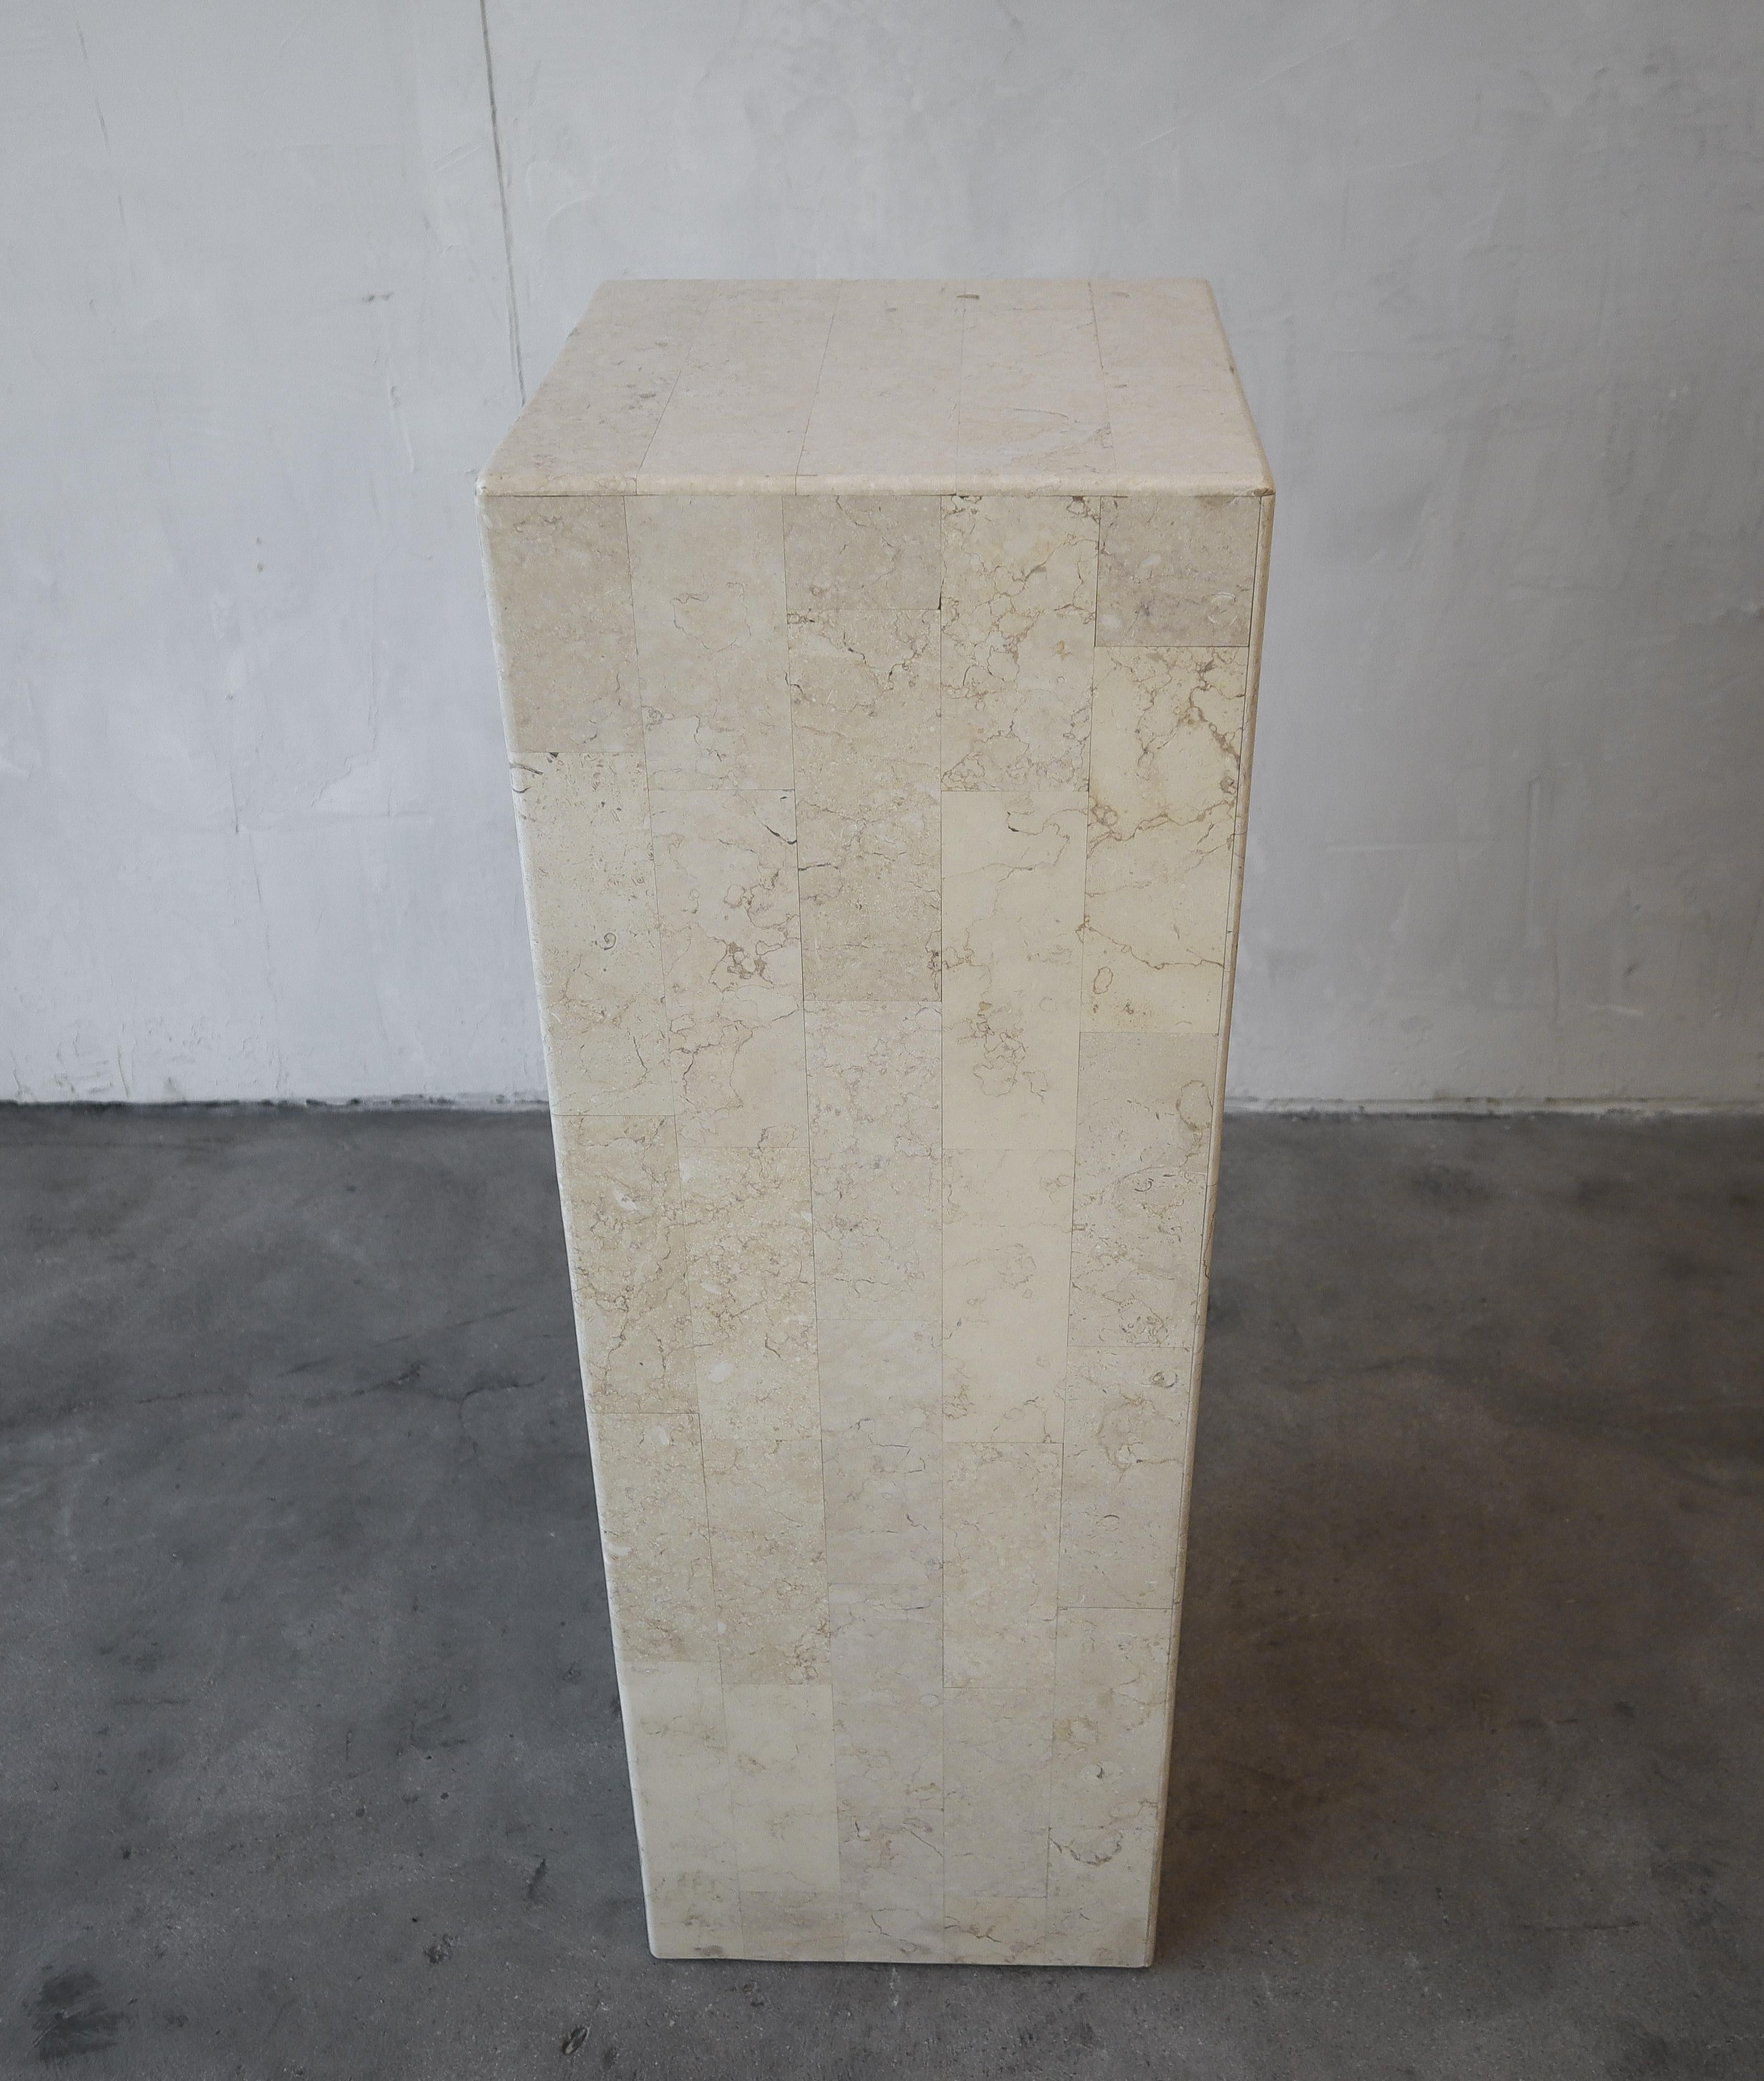 Clean and simple display pedestal. Pedestal is constructed of tessellated cream marble.

The pedestal is in excellent condition with no imperfections to be noted.

**2nd Pedestal available in a slightly darker color (slightly more beige).